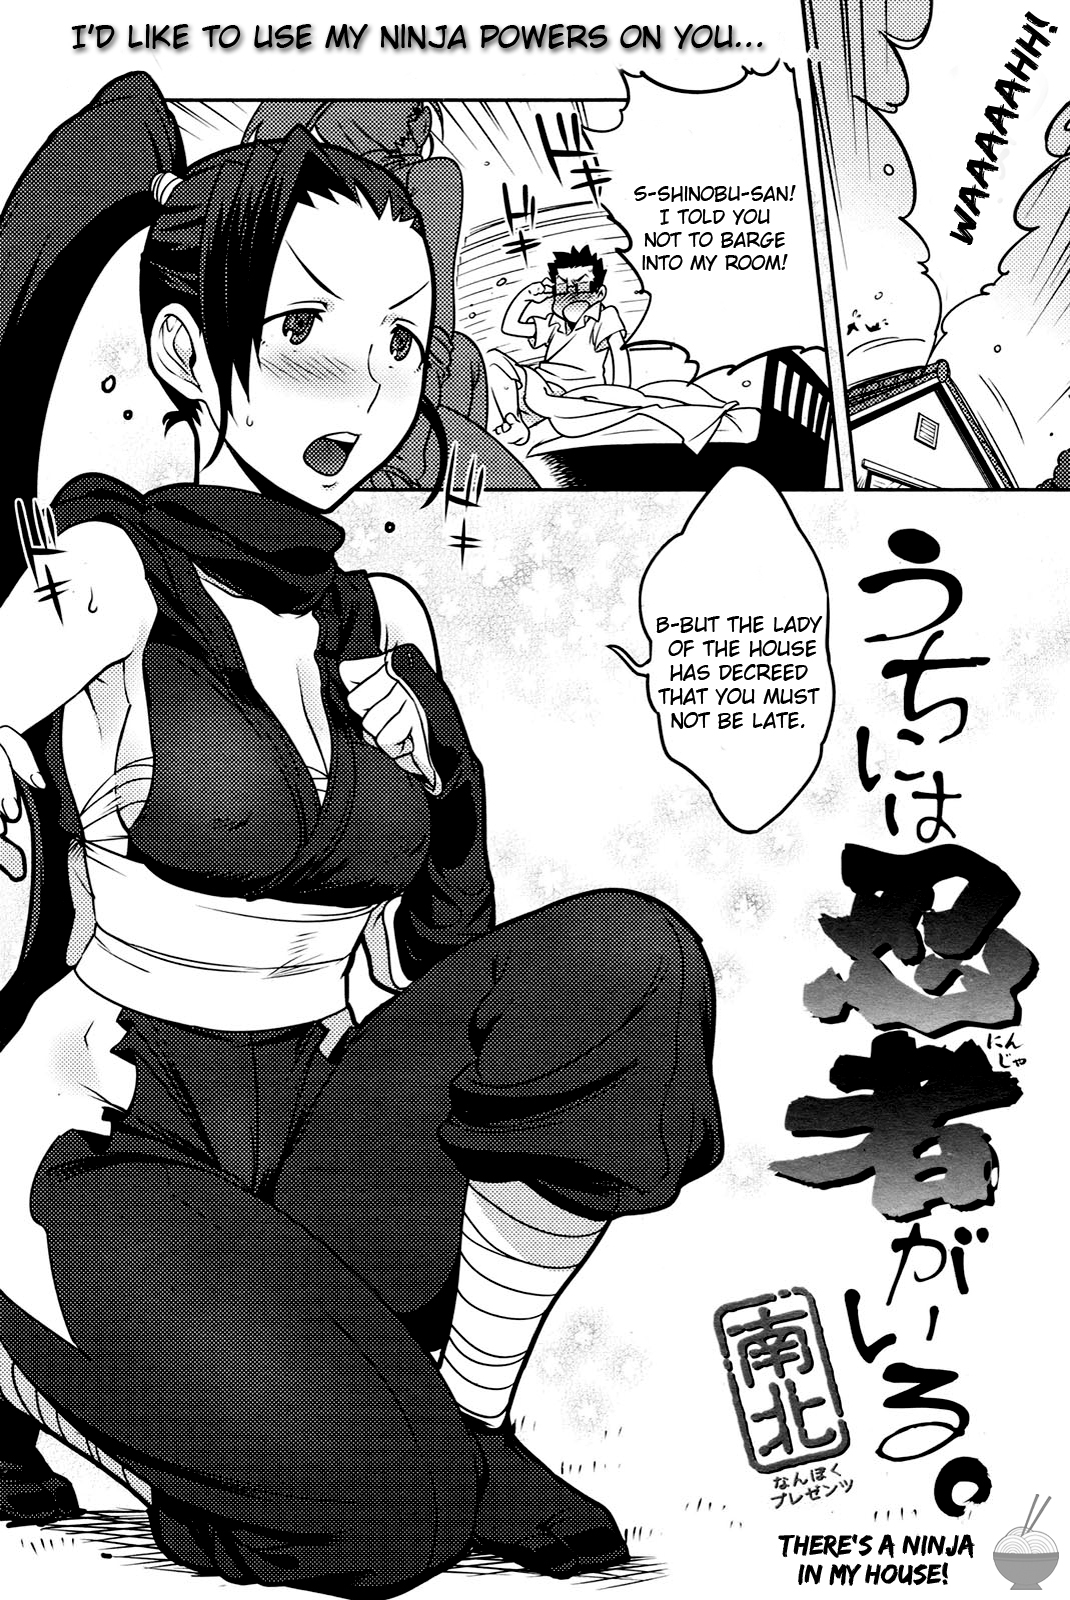 [Nanboku] There's a Ninja in my House! [English] [Soba-scans] page 2 full